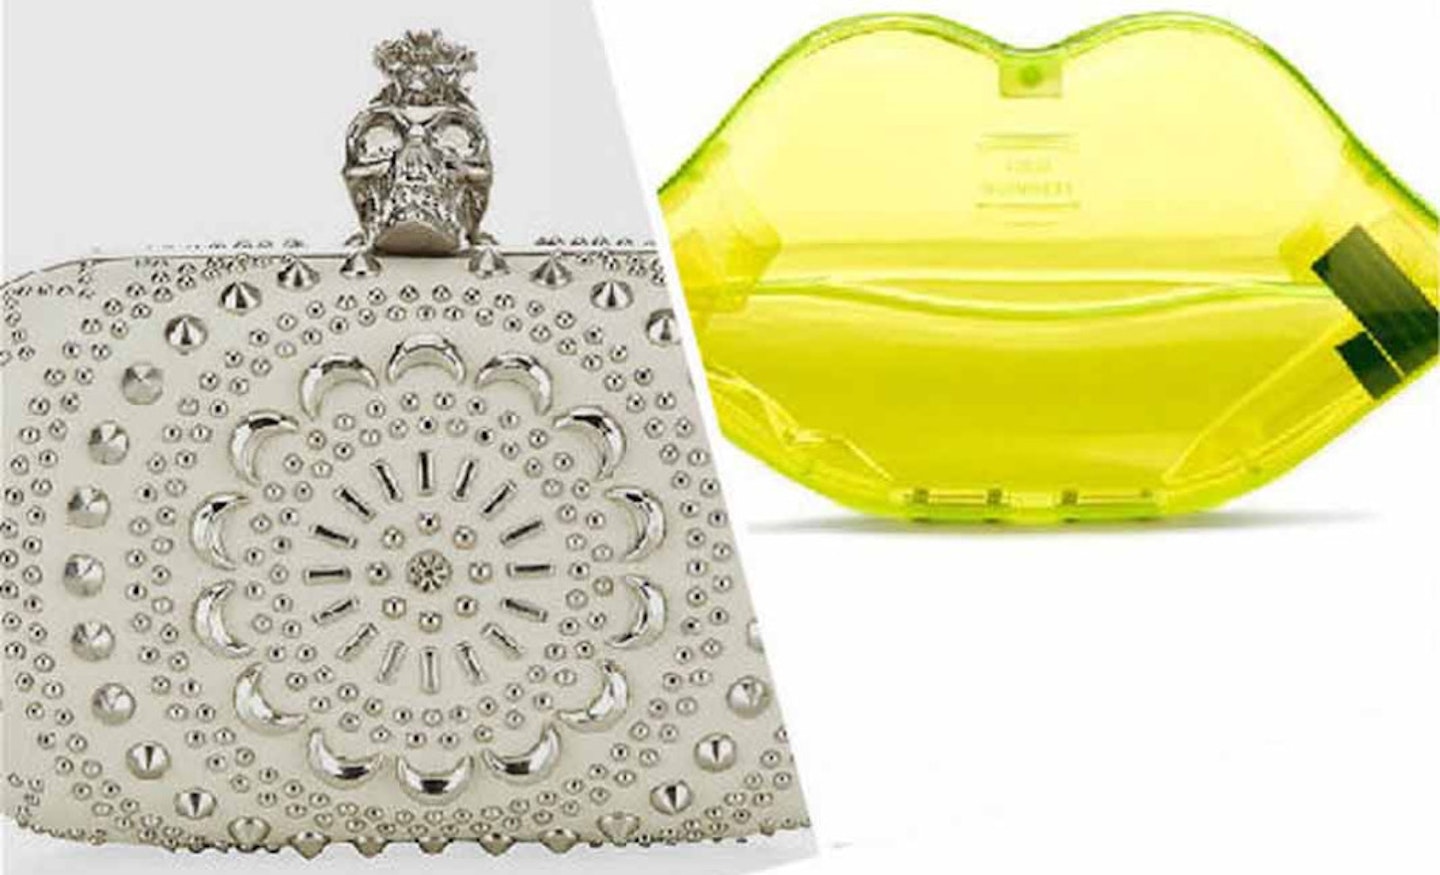 GALLERY >> Our Top 30 Clutch Bags